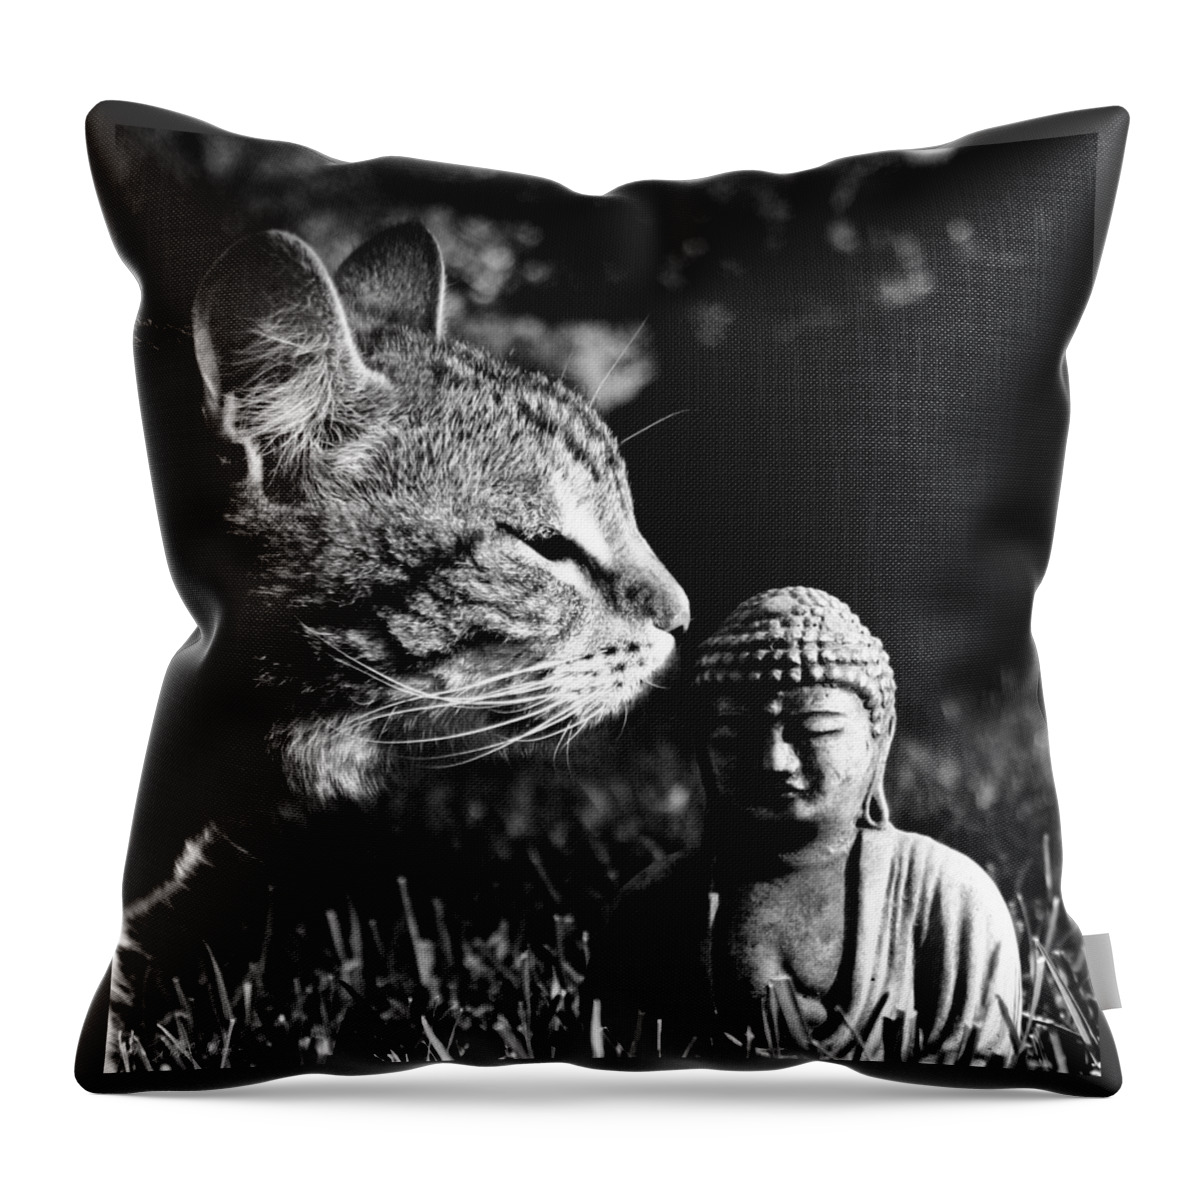 Cat Throw Pillow featuring the photograph Zen Cat Black and White- Photography by Linda Woods by Linda Woods